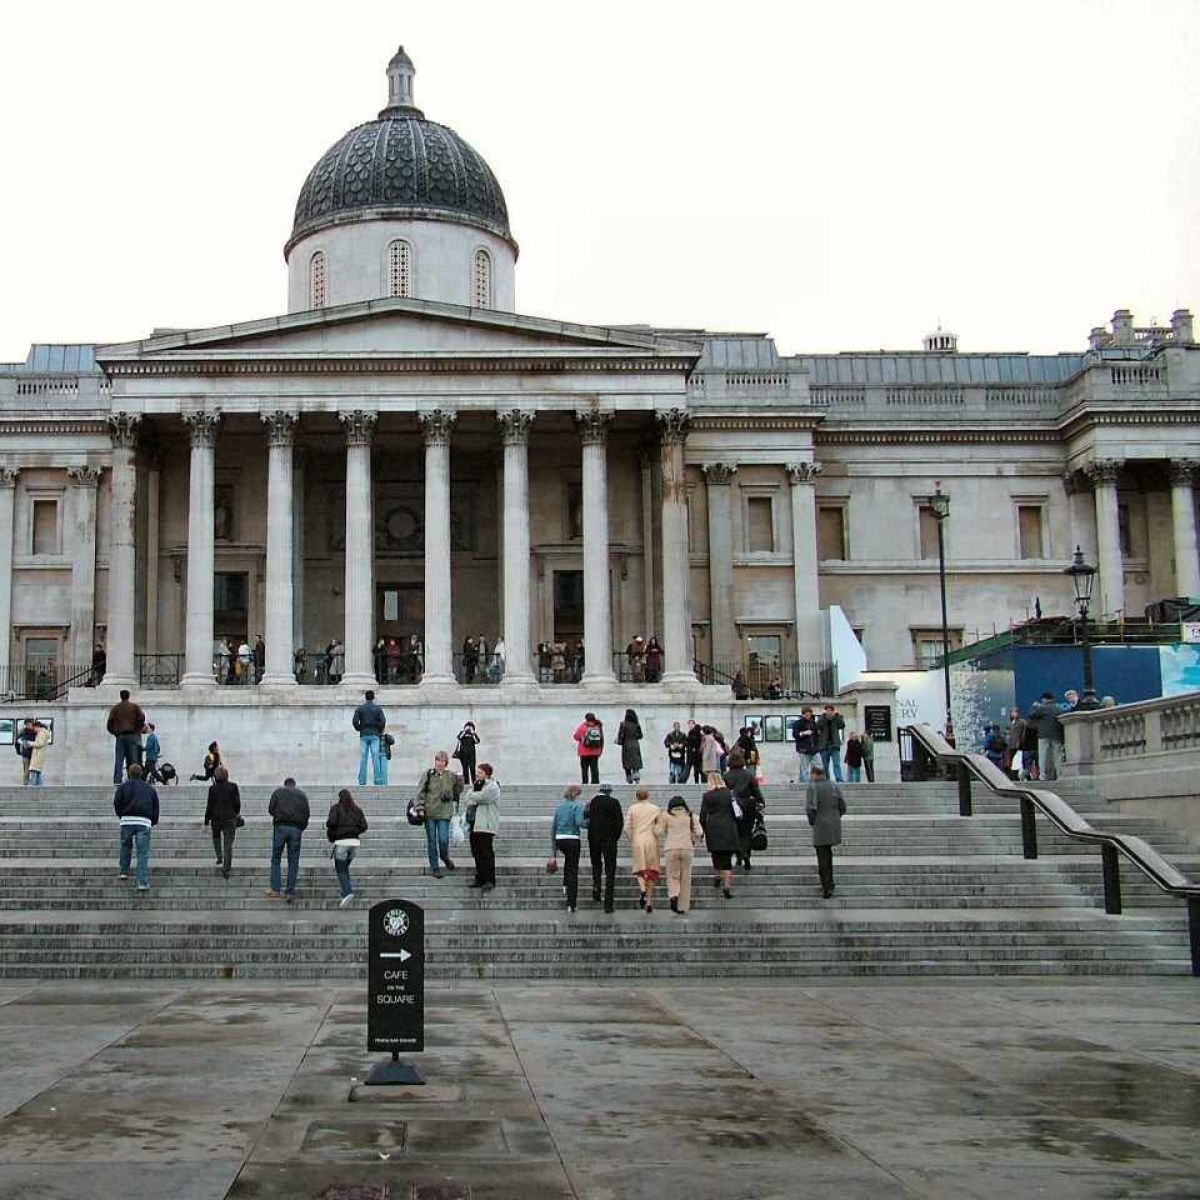 The National Gallery Londyn